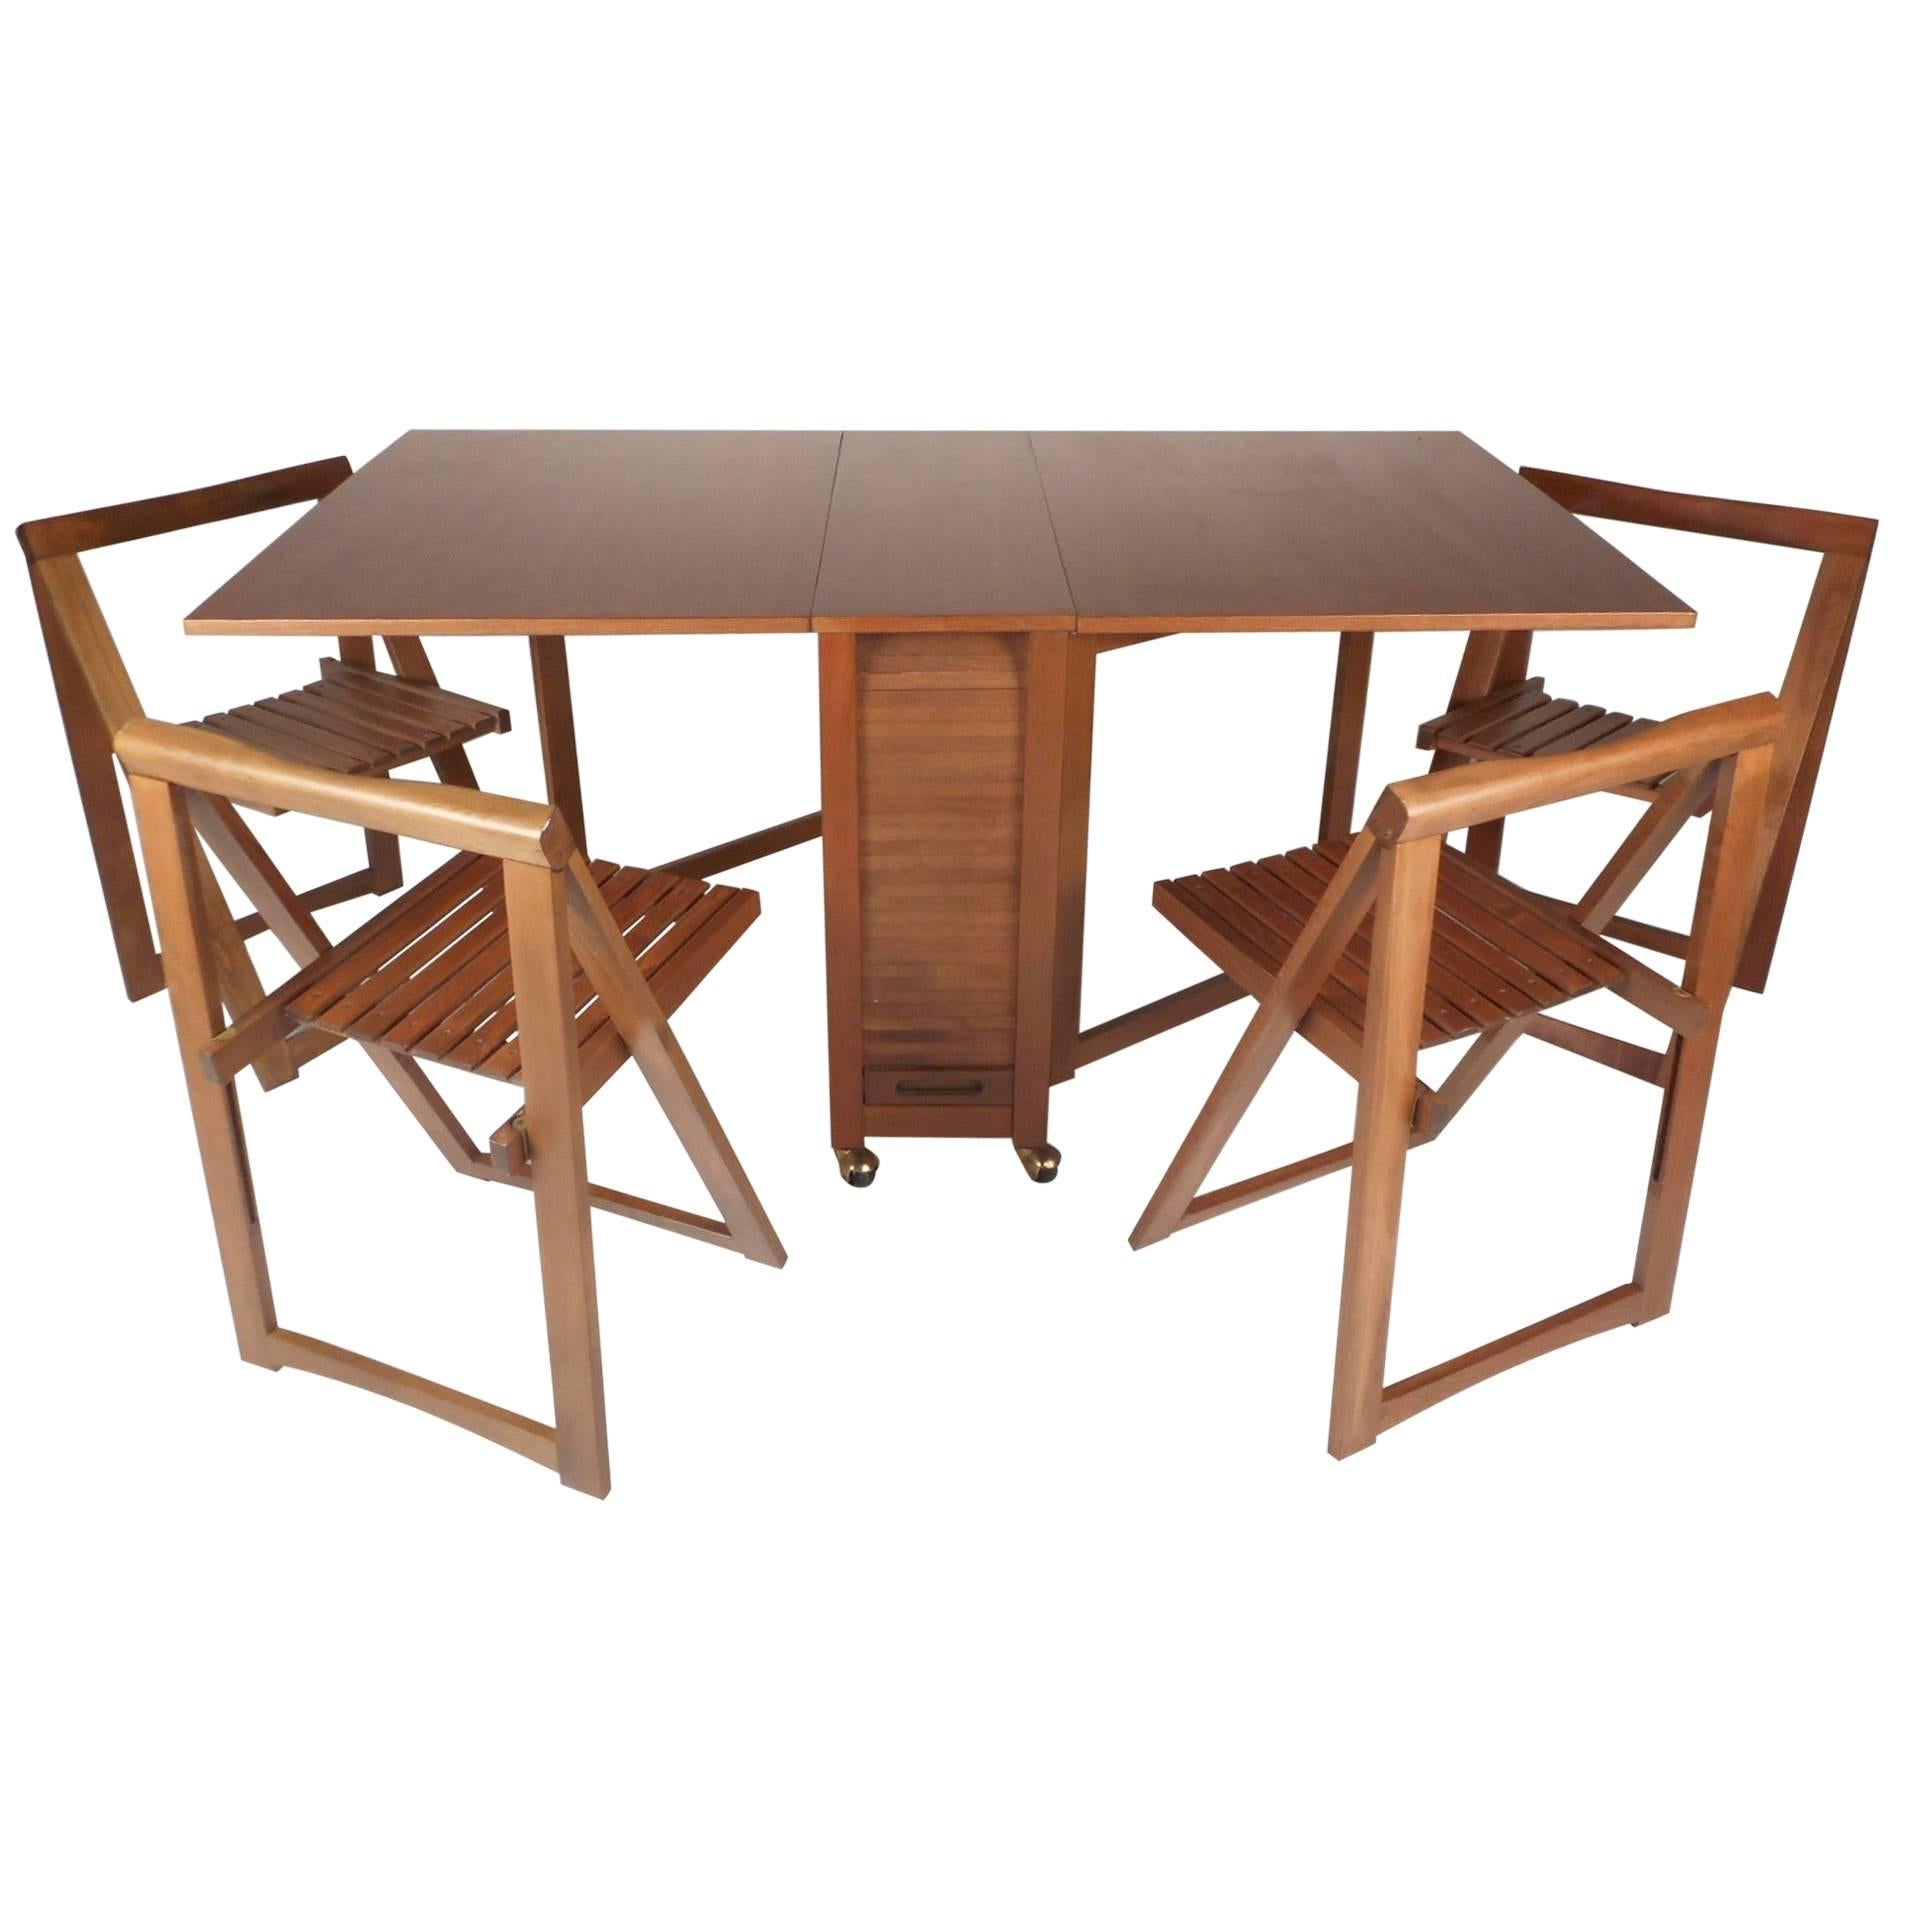 Mid-Century Modern Drop-Leaf Dining Table with Chairs